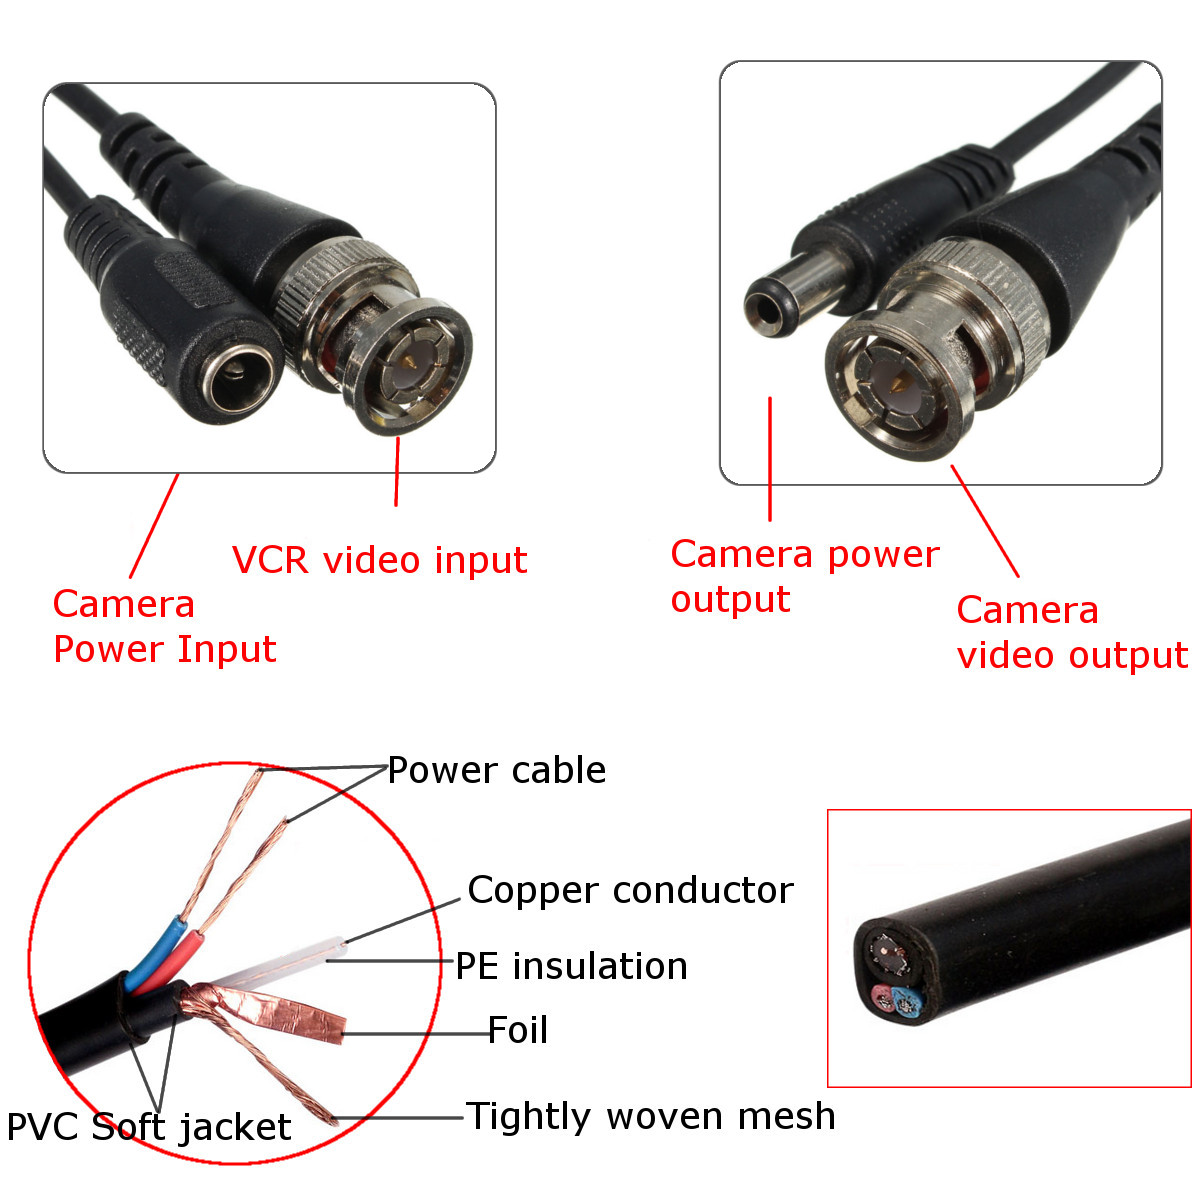 65Ft 20M Security Camera Cable Video Power Extension Wire CCTV DVR BNC RCA Cord